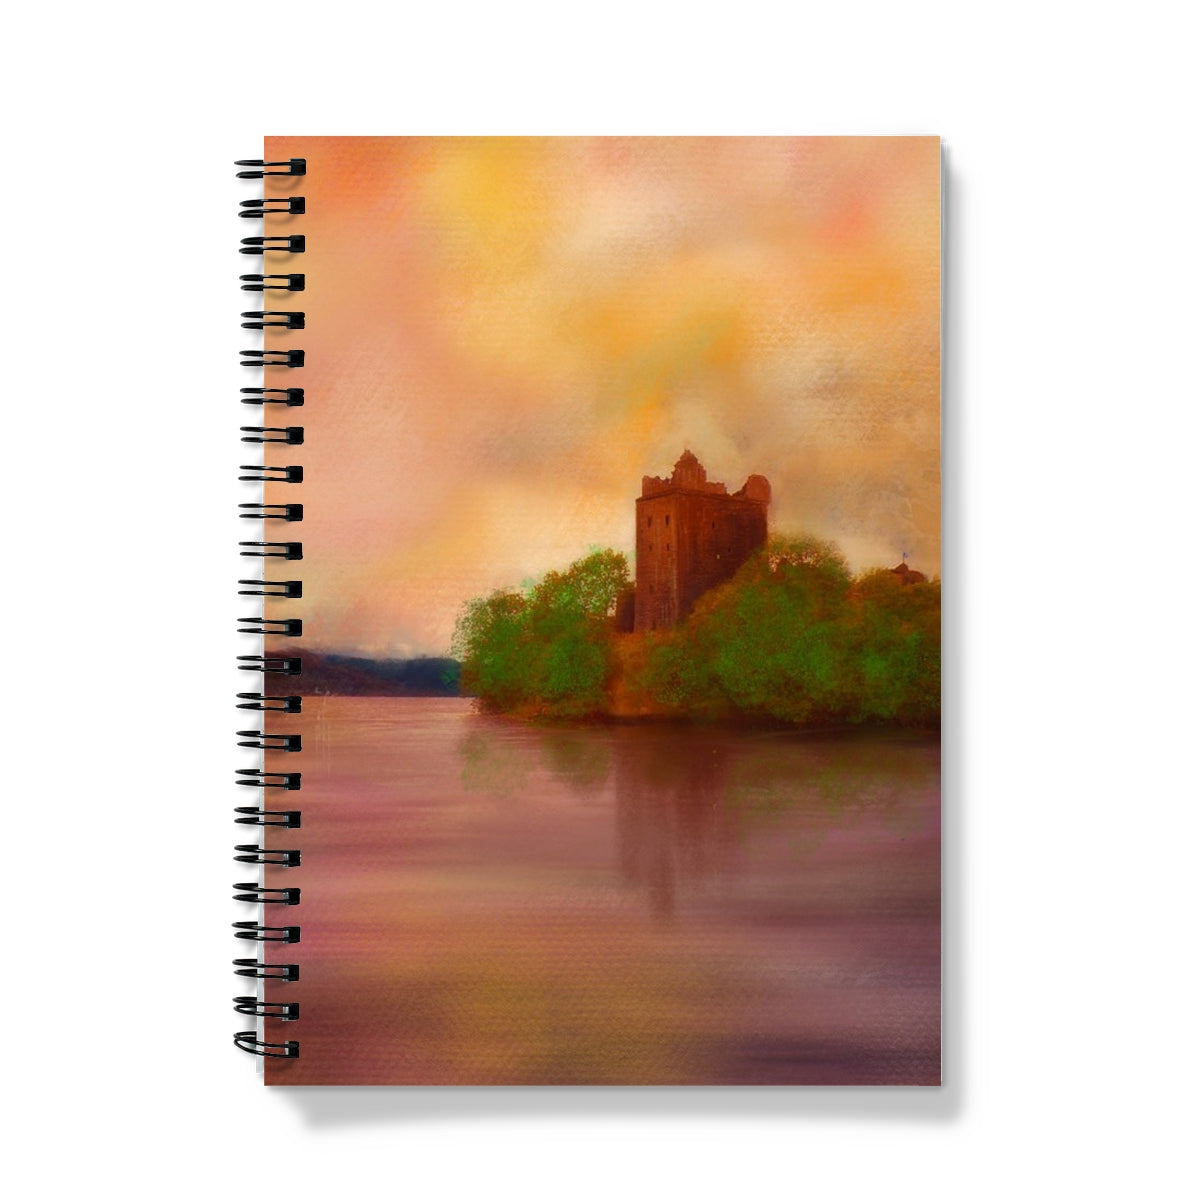 Urquhart Castle Art Gifts Notebook-Journals & Notebooks-Historic & Iconic Scotland Art Gallery-A5-Graph-Paintings, Prints, Homeware, Art Gifts From Scotland By Scottish Artist Kevin Hunter